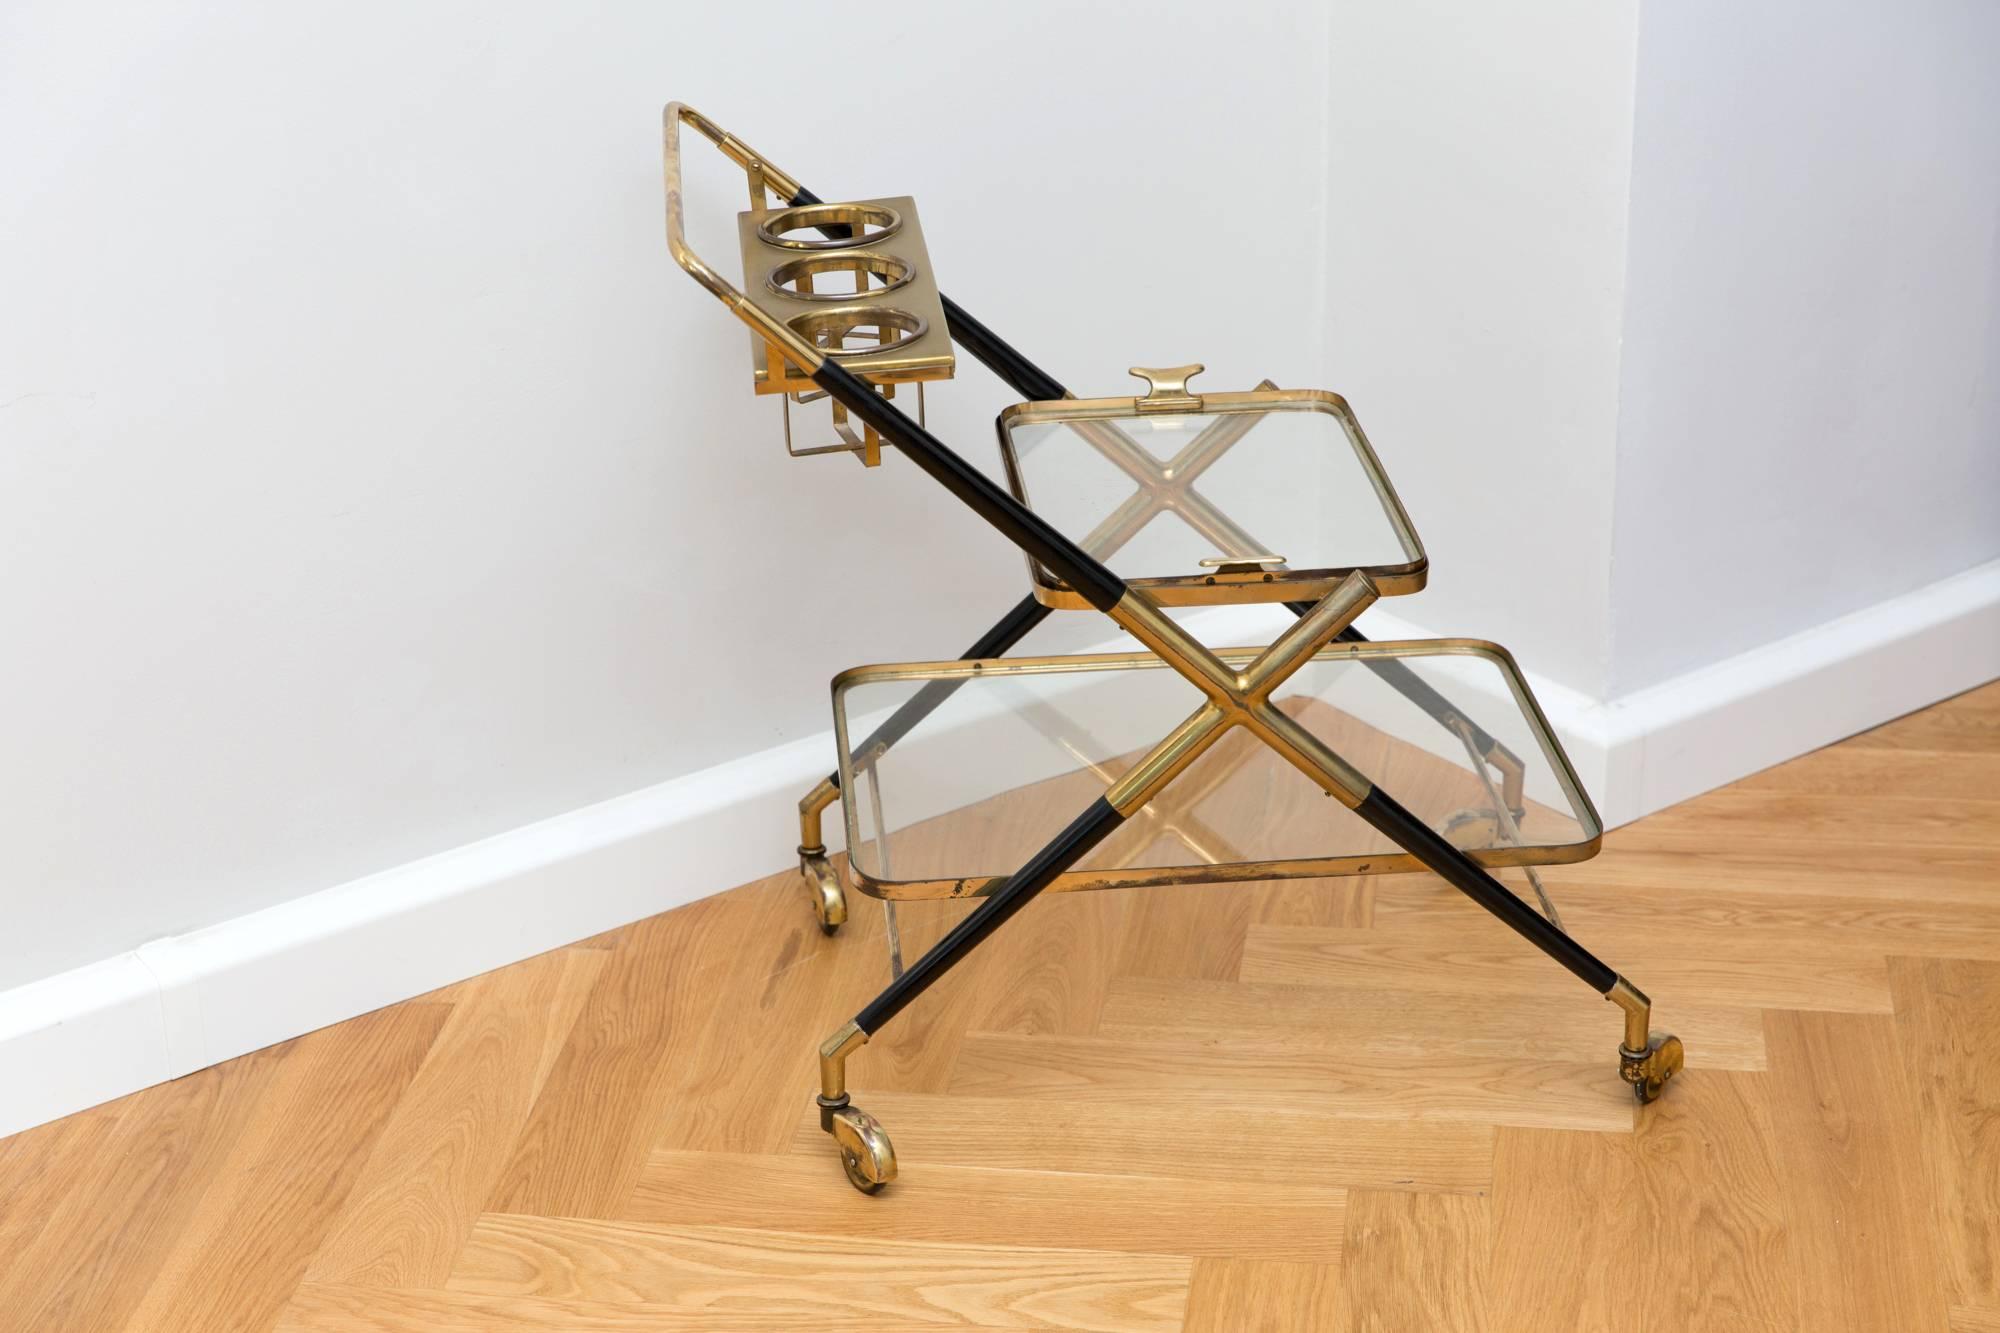 Bar cart by Cesare Lacca, Italy, circa 1950, brass and black polished shellack wood bar cart, tapering sculptural form with two tapering glass tiers, bottle holder, brass rolls. Restored condition with brass patina.